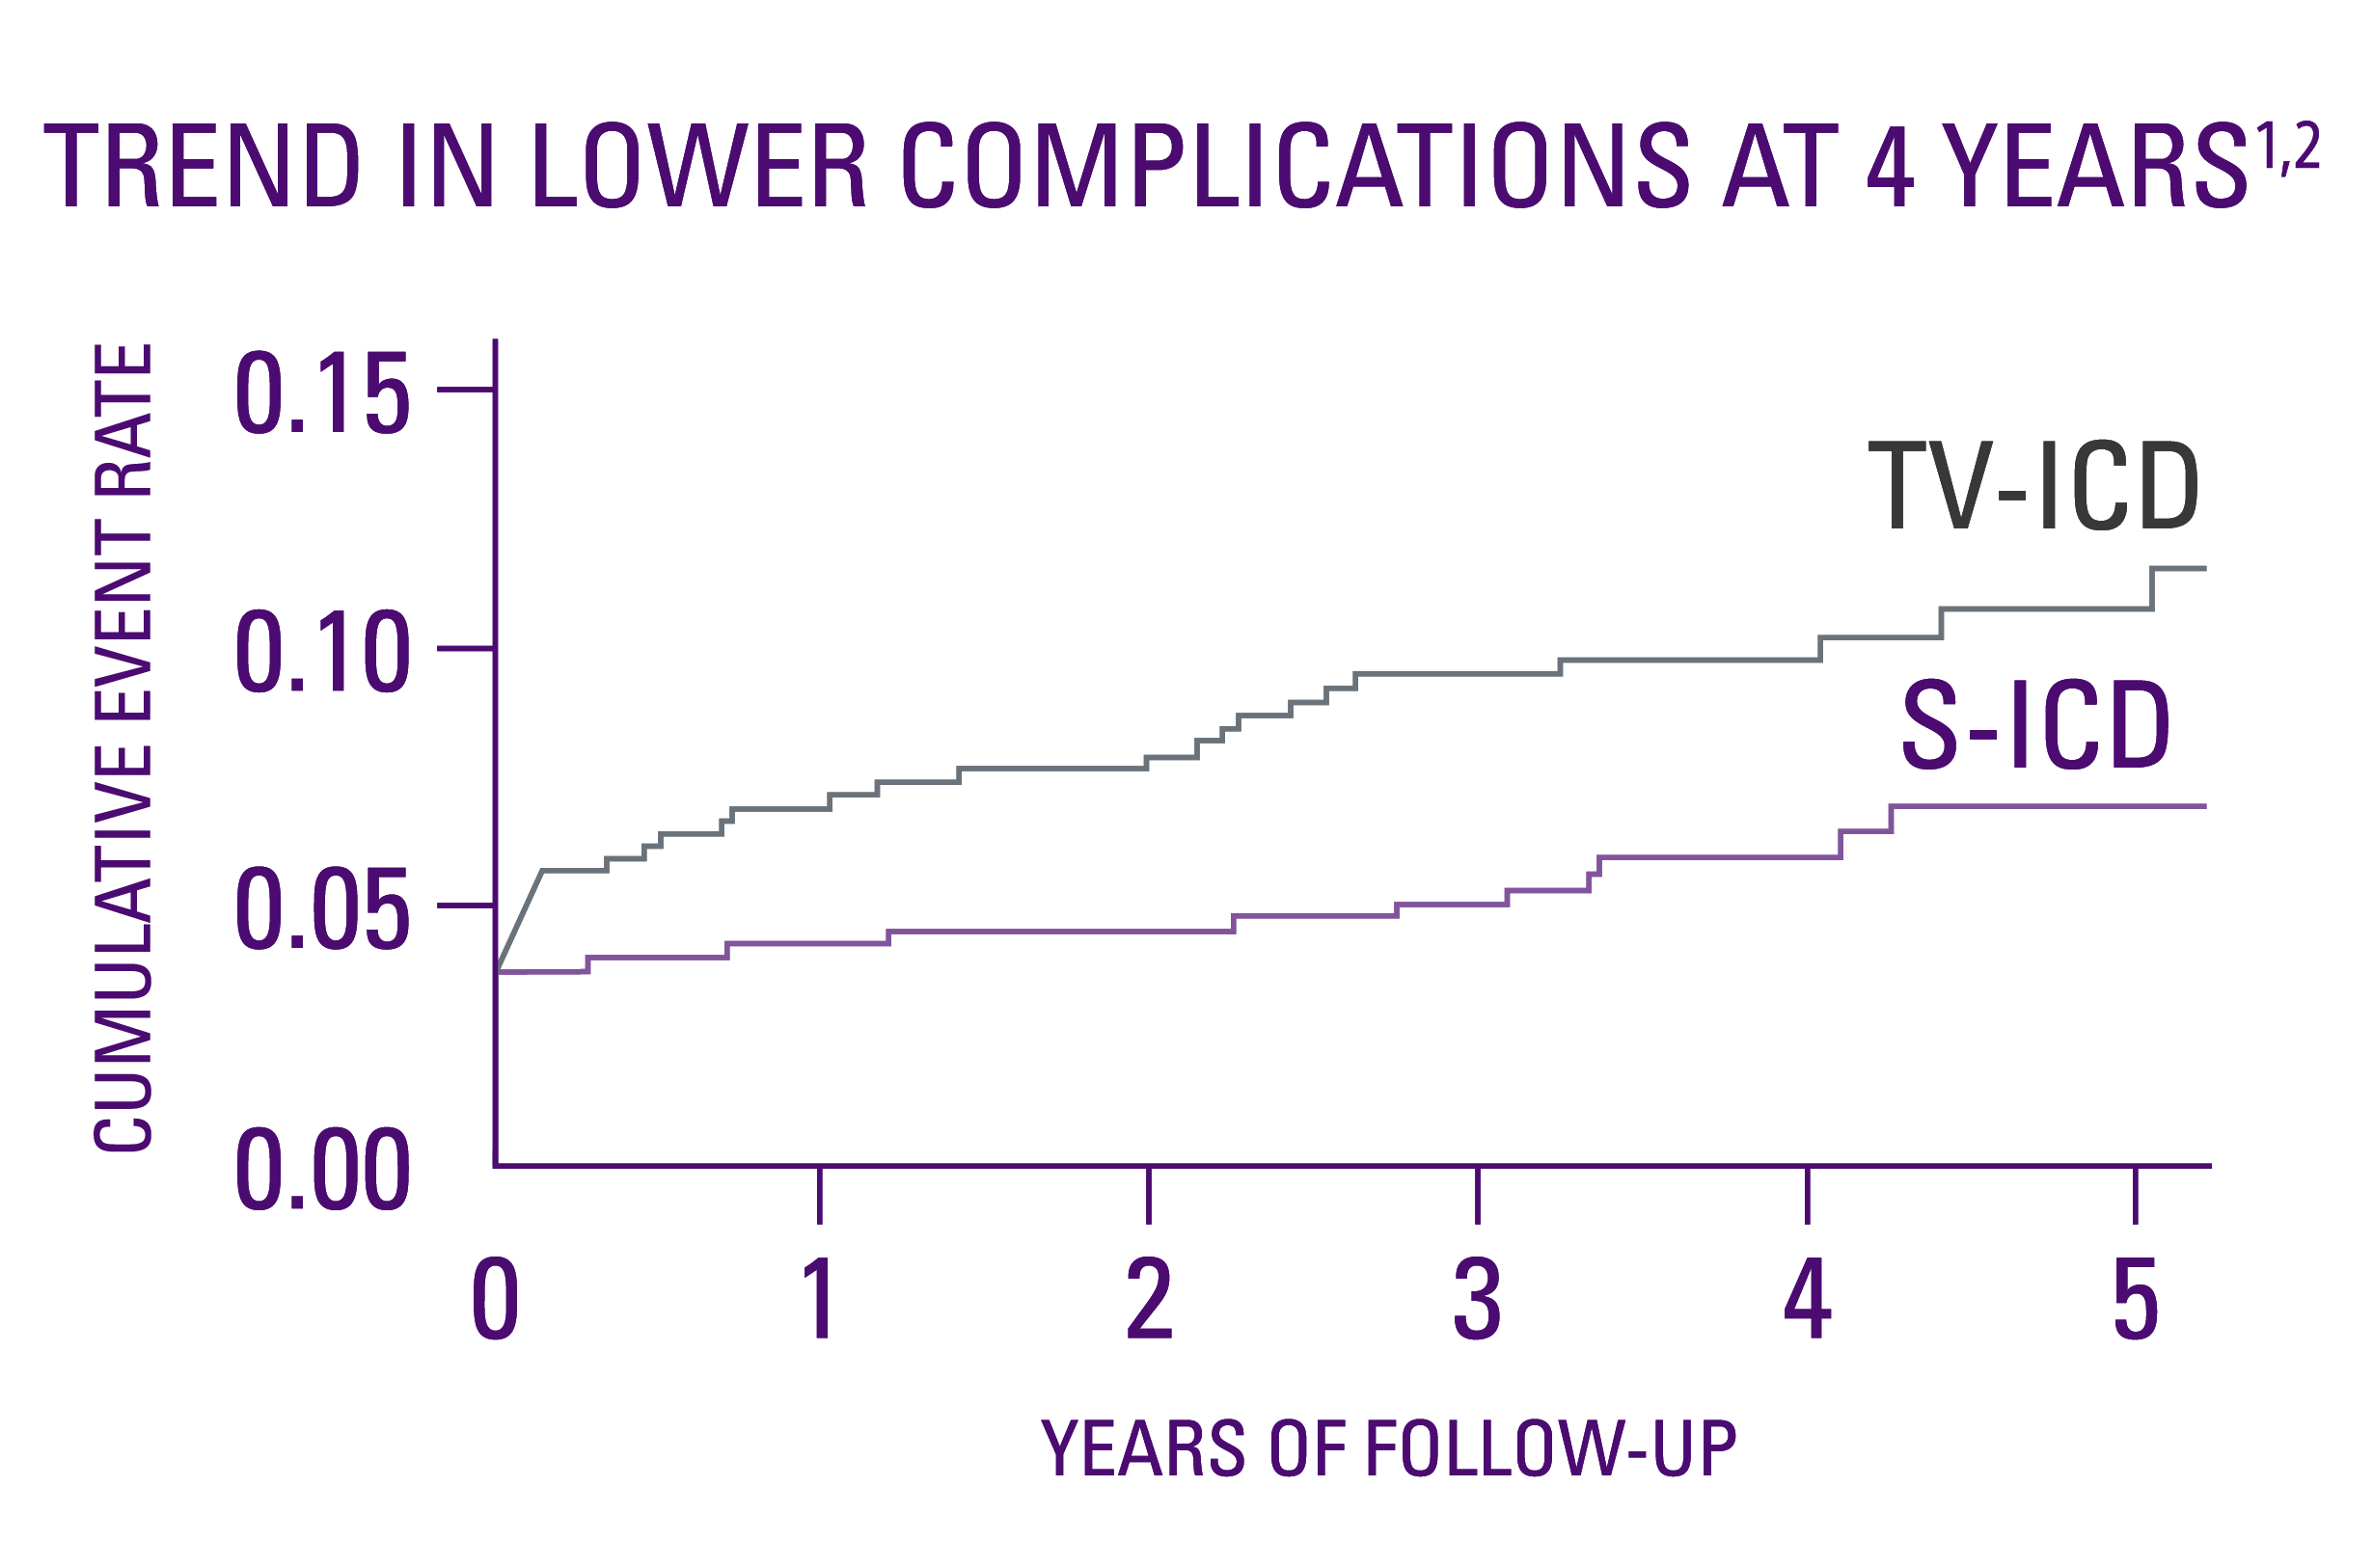 Trend in lower complications at 4 years; TV-ICD has higher cumulative event rate that S-ICD.
